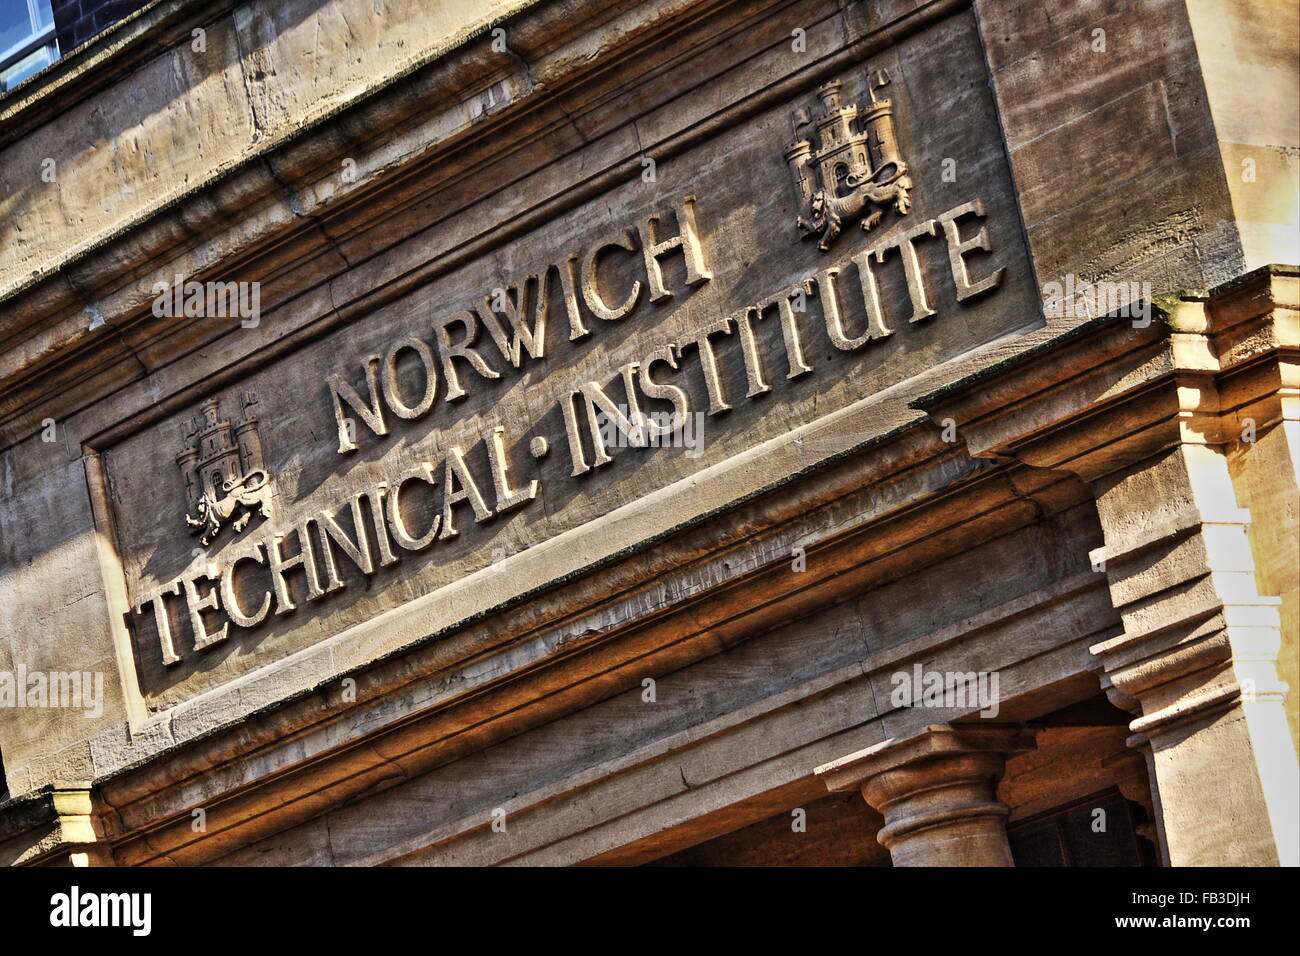 Main Entrance to Norwich Technical Institute Stock Photo